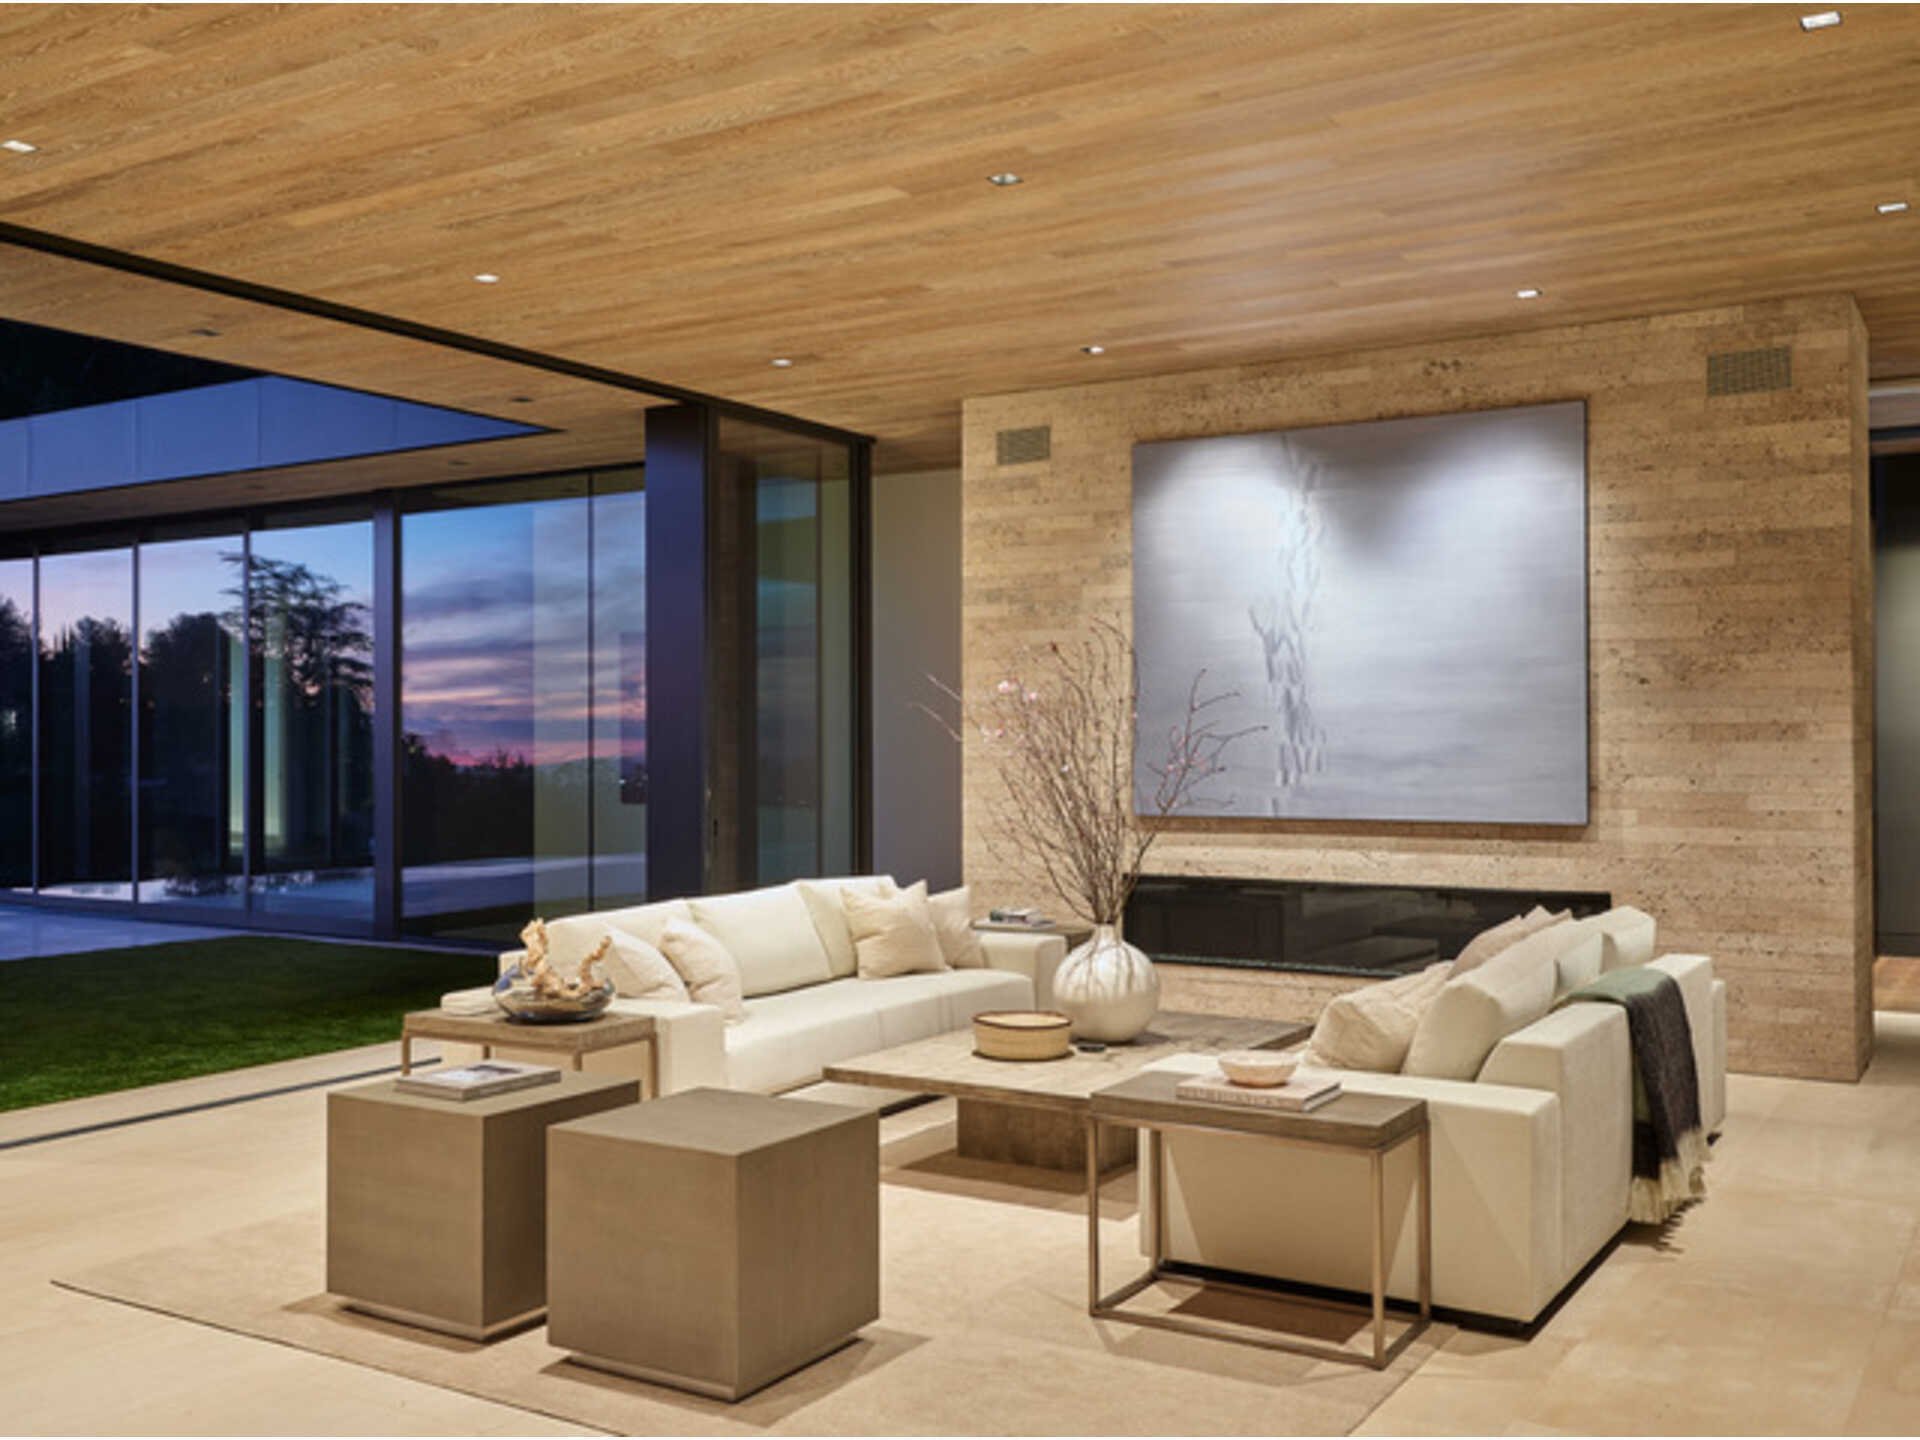 Beverly Hills Residence with Custom Travertine Wall Cladding